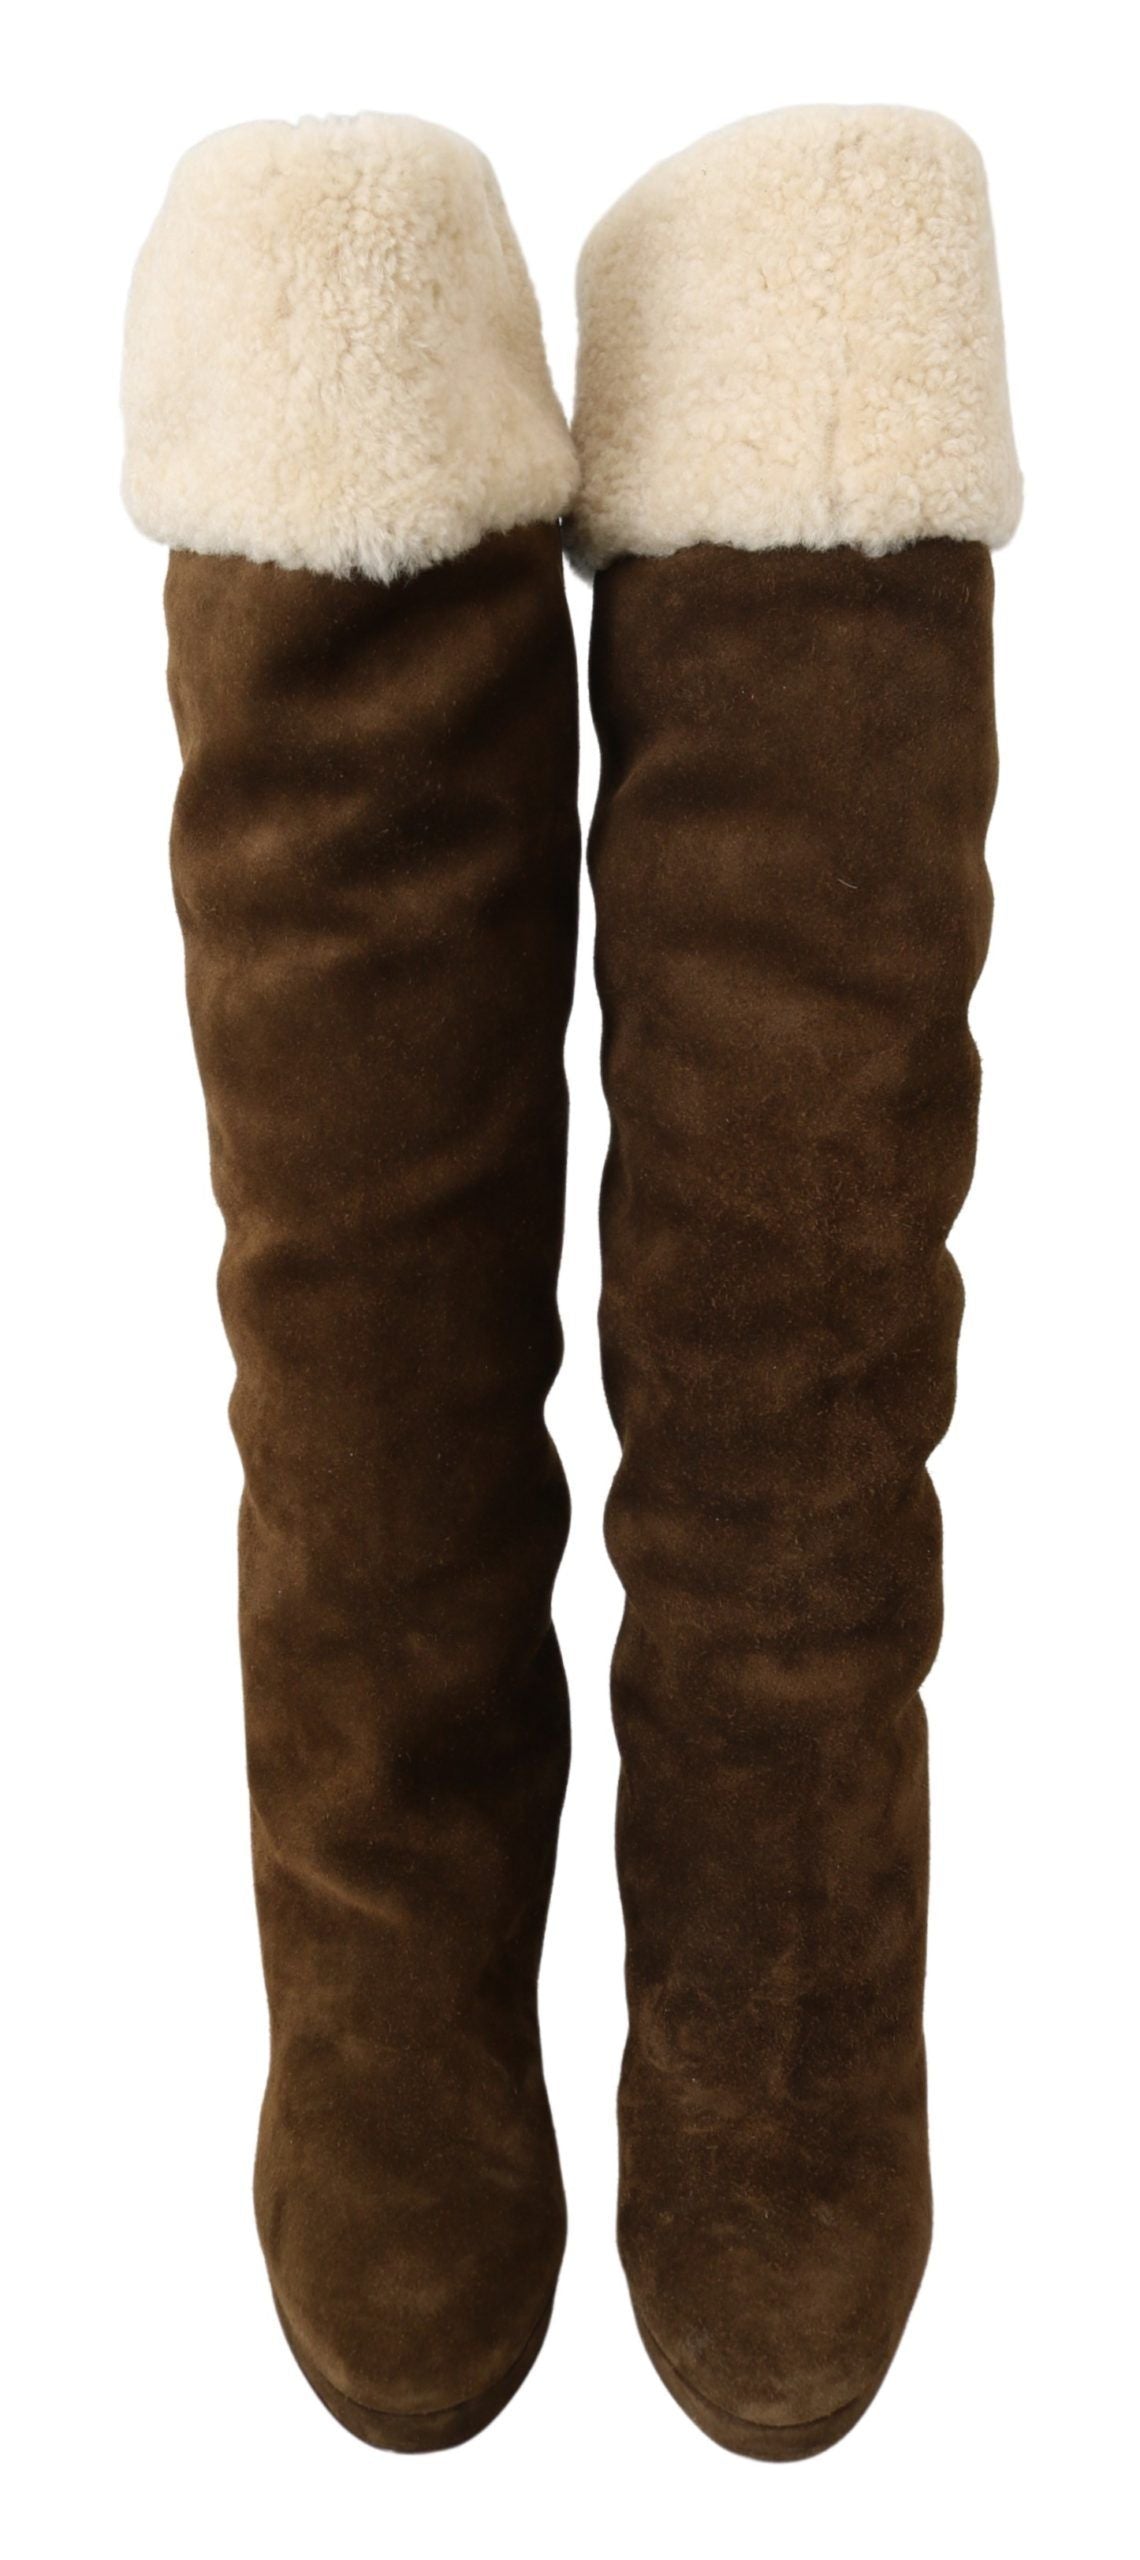 Elegant Knee High Suede Boots in Brown and White